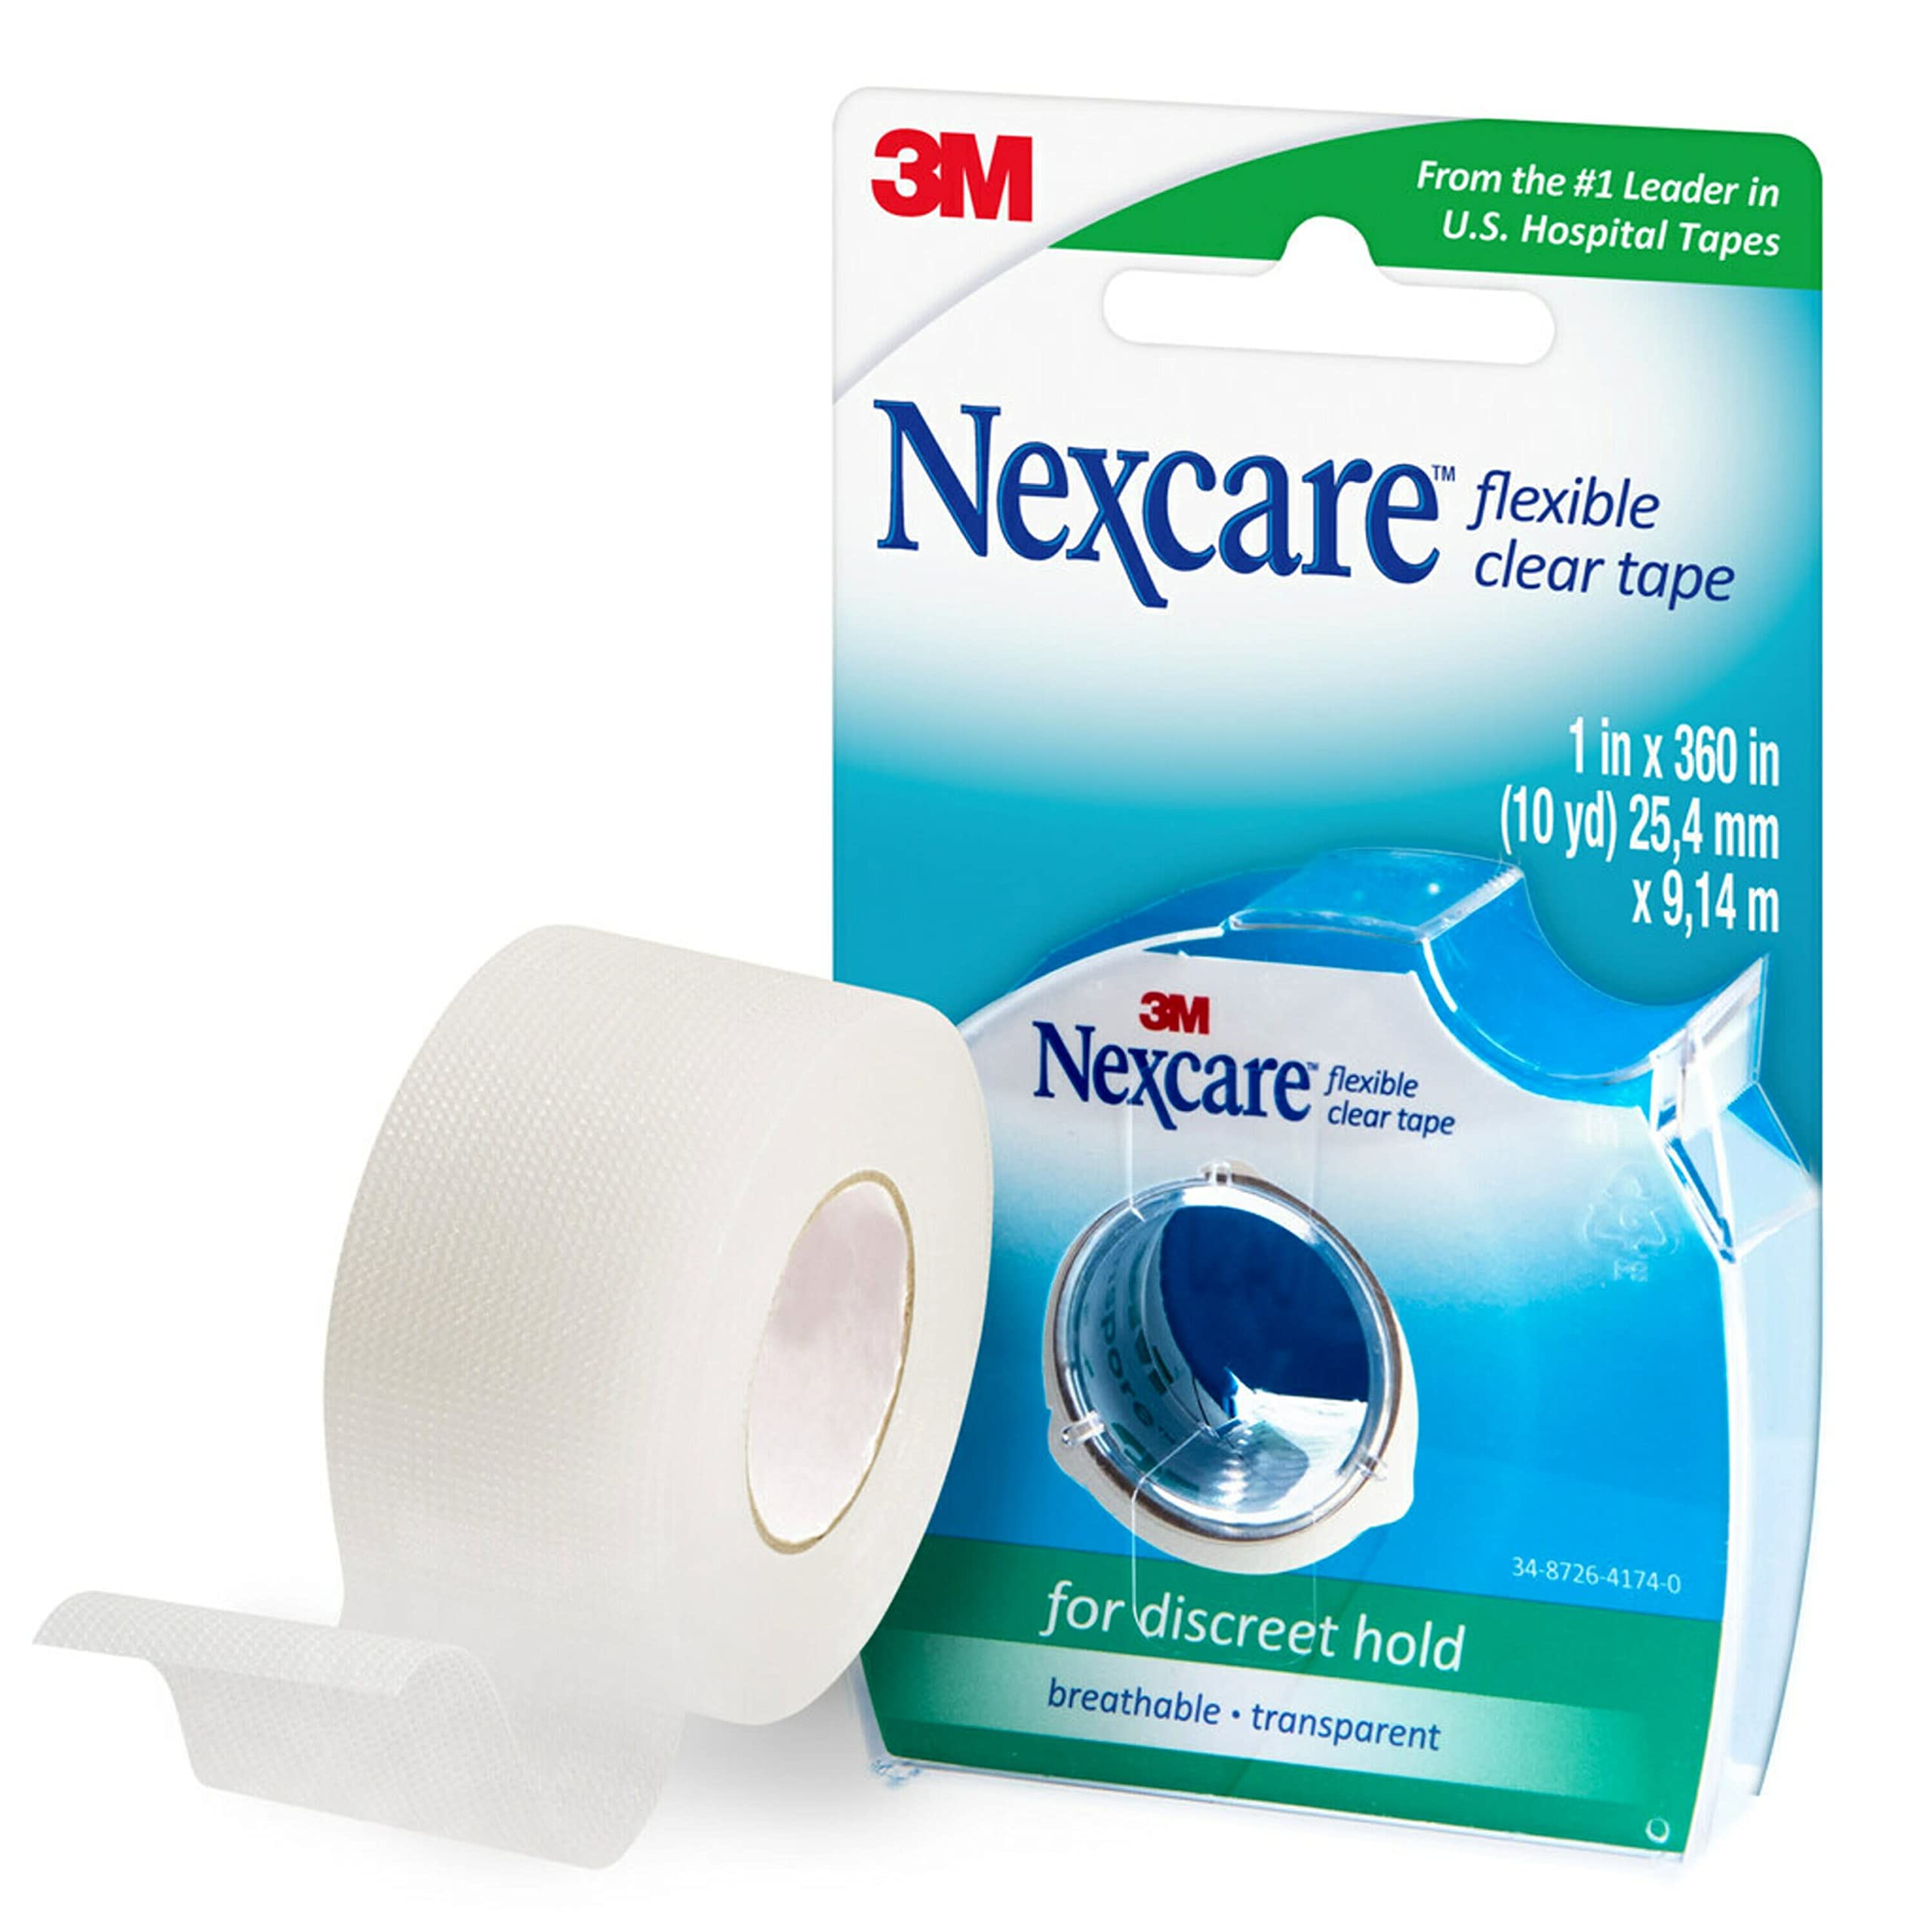 Nexcare Flexible Clear First Aid Tape, Clear and Stretchy Design Conforms To Hard To Tape Areas, 1 in x 10 yd, 1 Roll with Dispenser